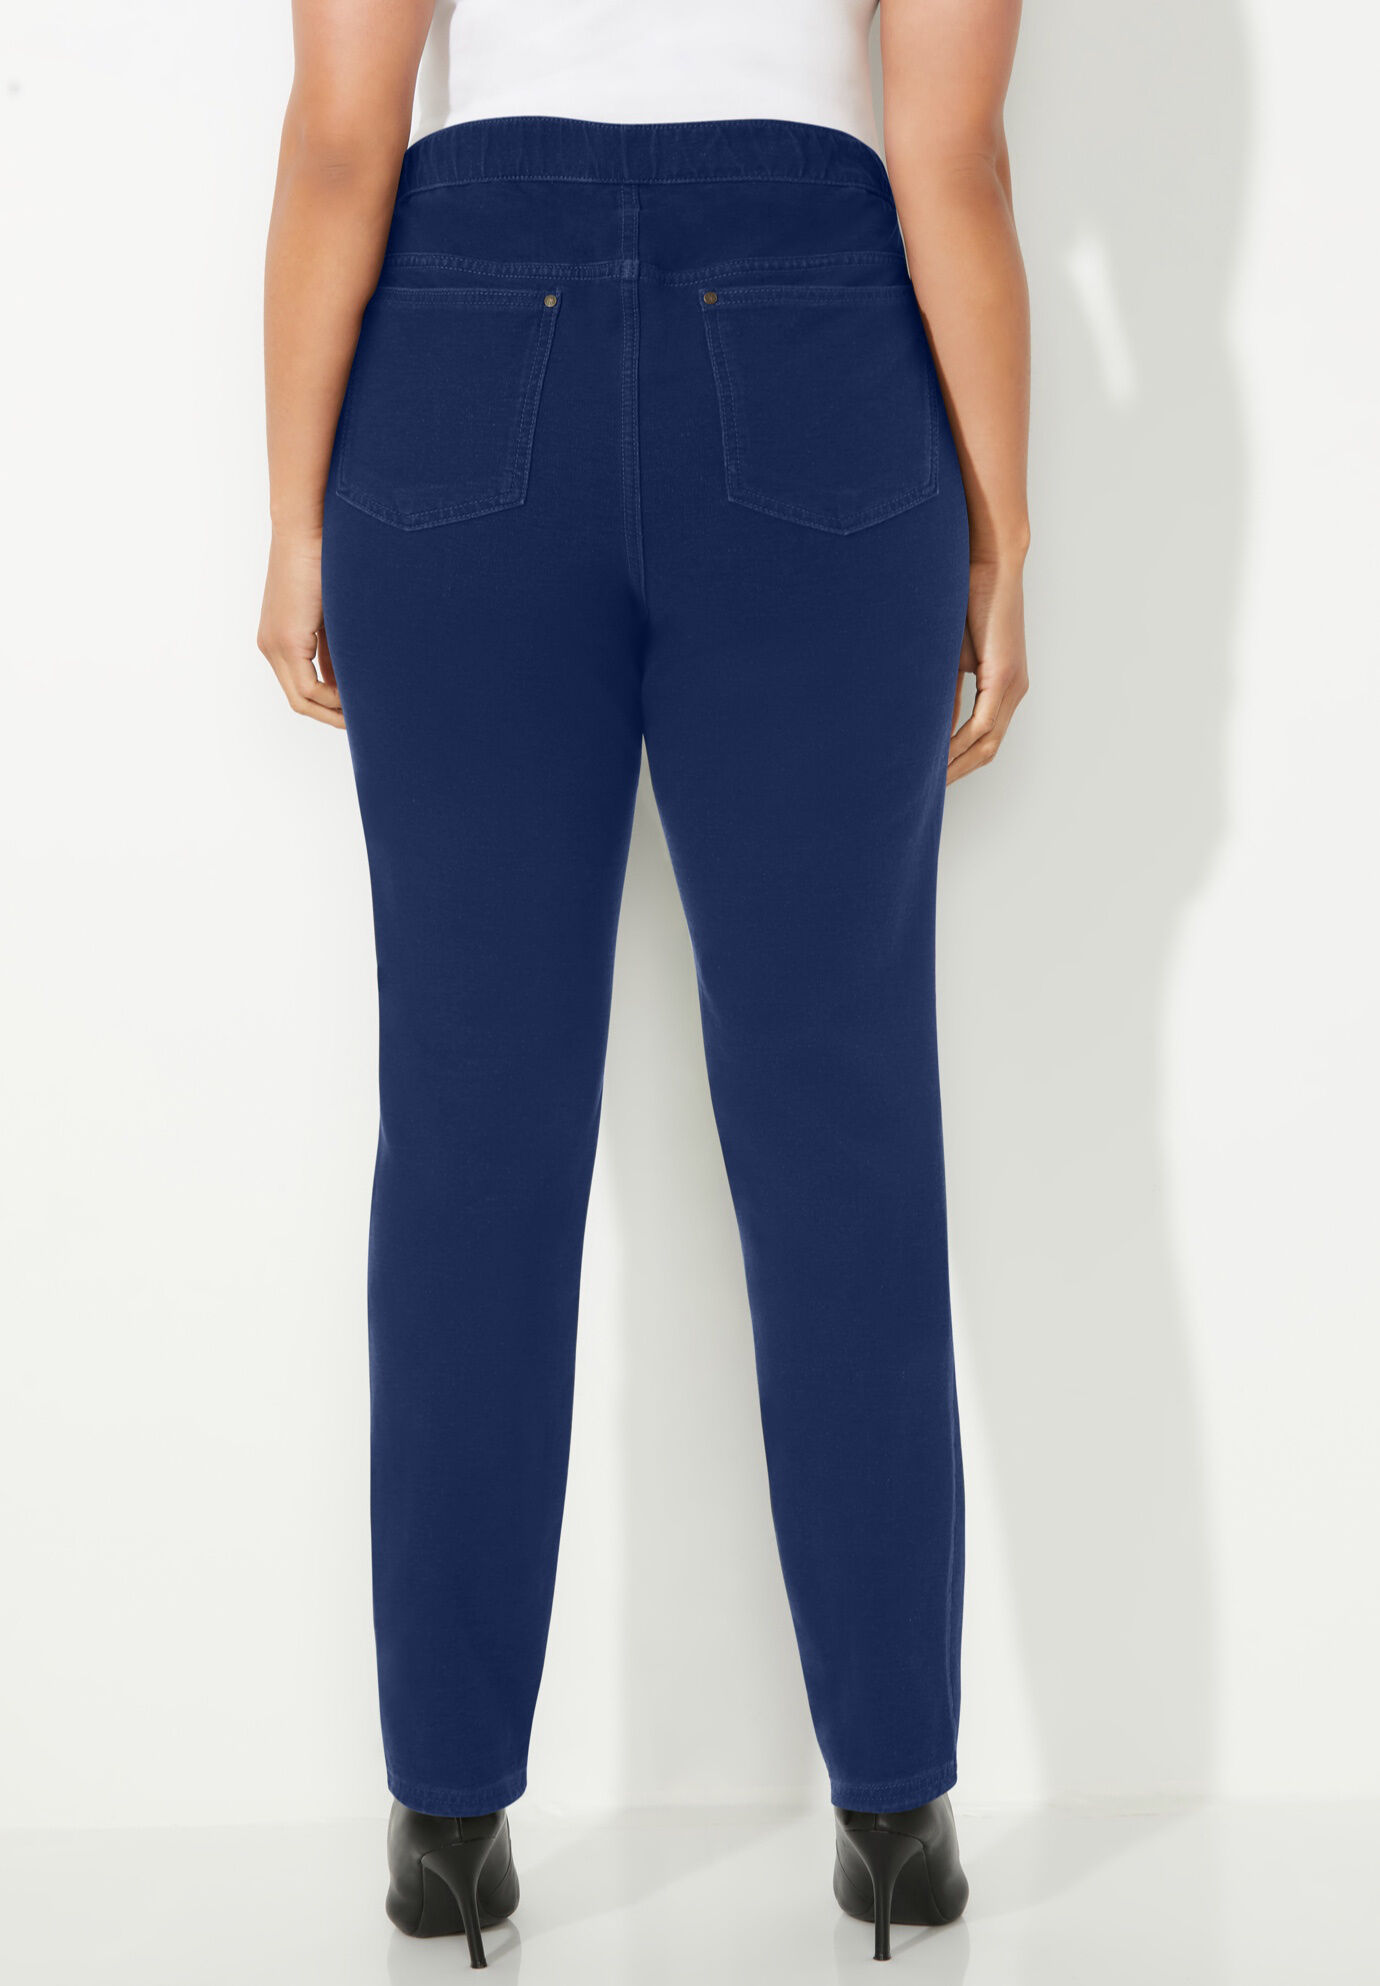 Pull On Knit Jeans for Women